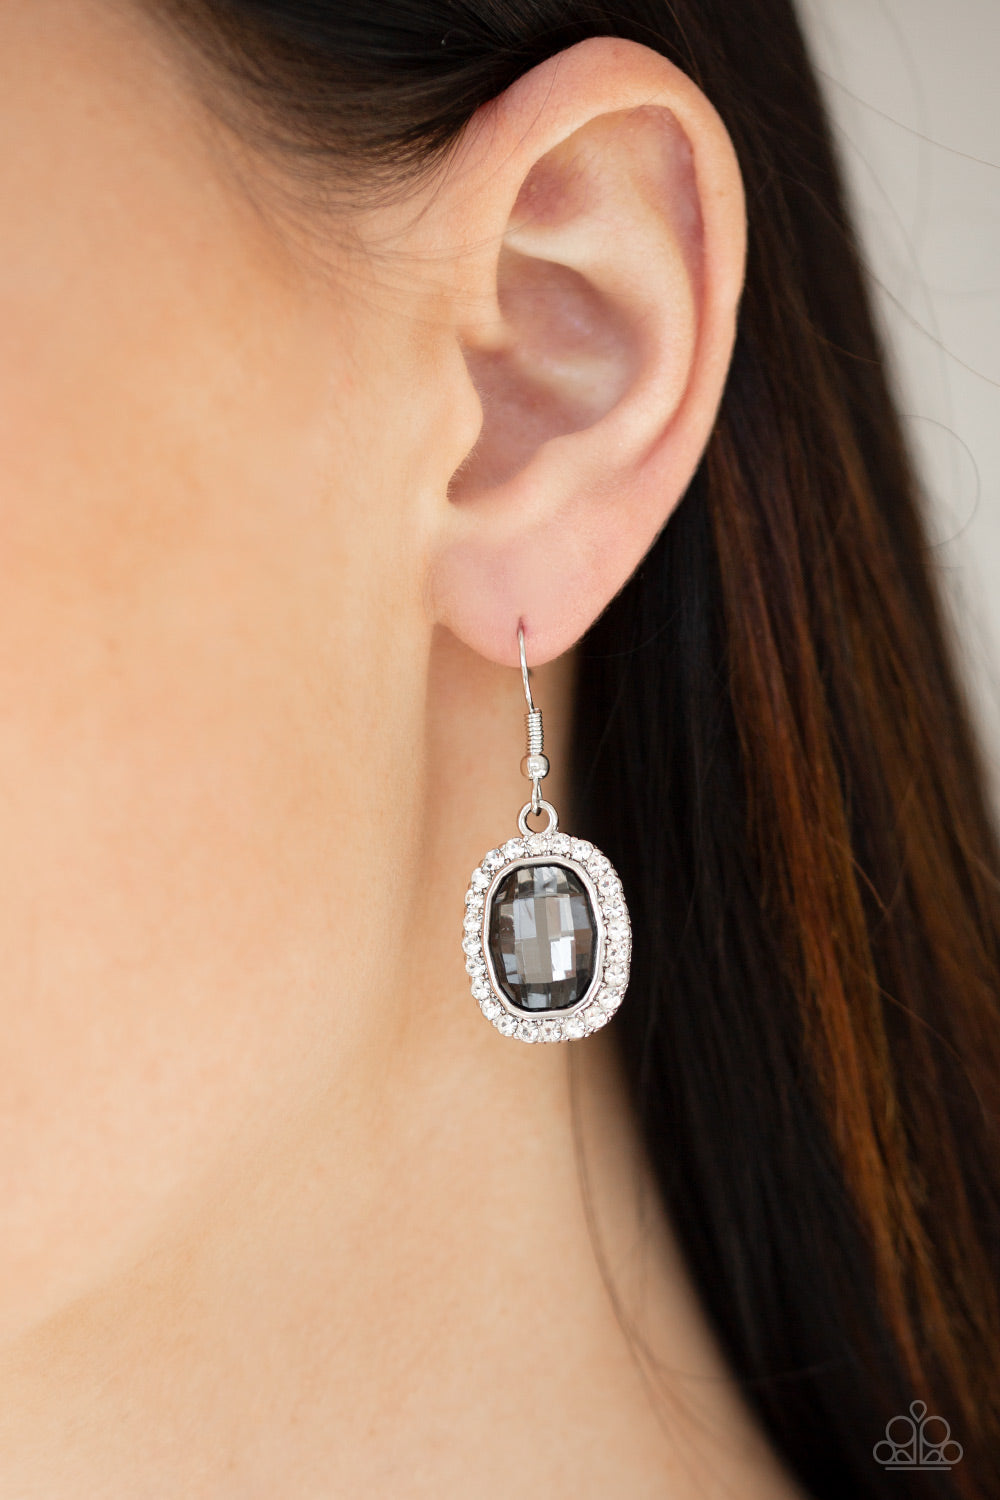 The Modern Monroe - Silver and Smoky Gem Earrings - Paparazzi Accessories - A smoky gem is pressed into a shimmery silver frame radiating with glassy white rhinestones for a timeless fashion. Earring attaches to a standard fishhook fitting.